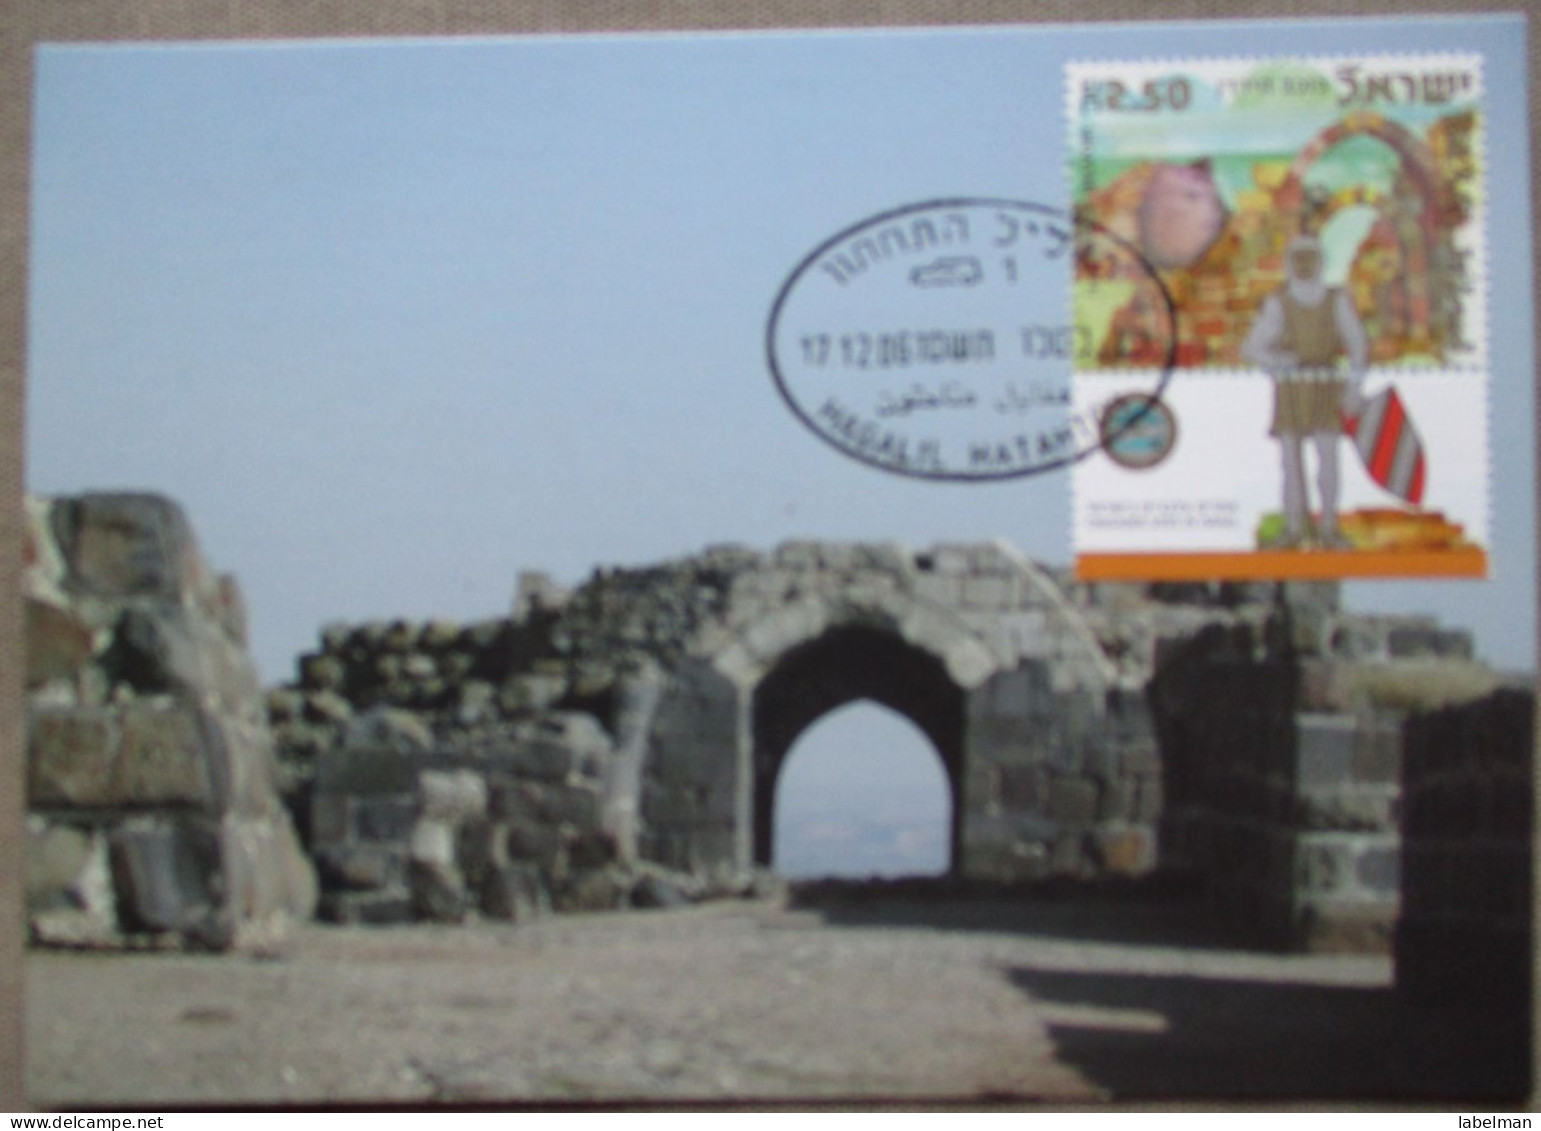 ISRAEL 2006 MAXIMUM CARD POSTCARD BELVOIR FORT GALILEE FIRST DAY OF ISSUE CARTOLINA CARTE POSTALE POSTKARTE CARTOLINA - Maximum Cards